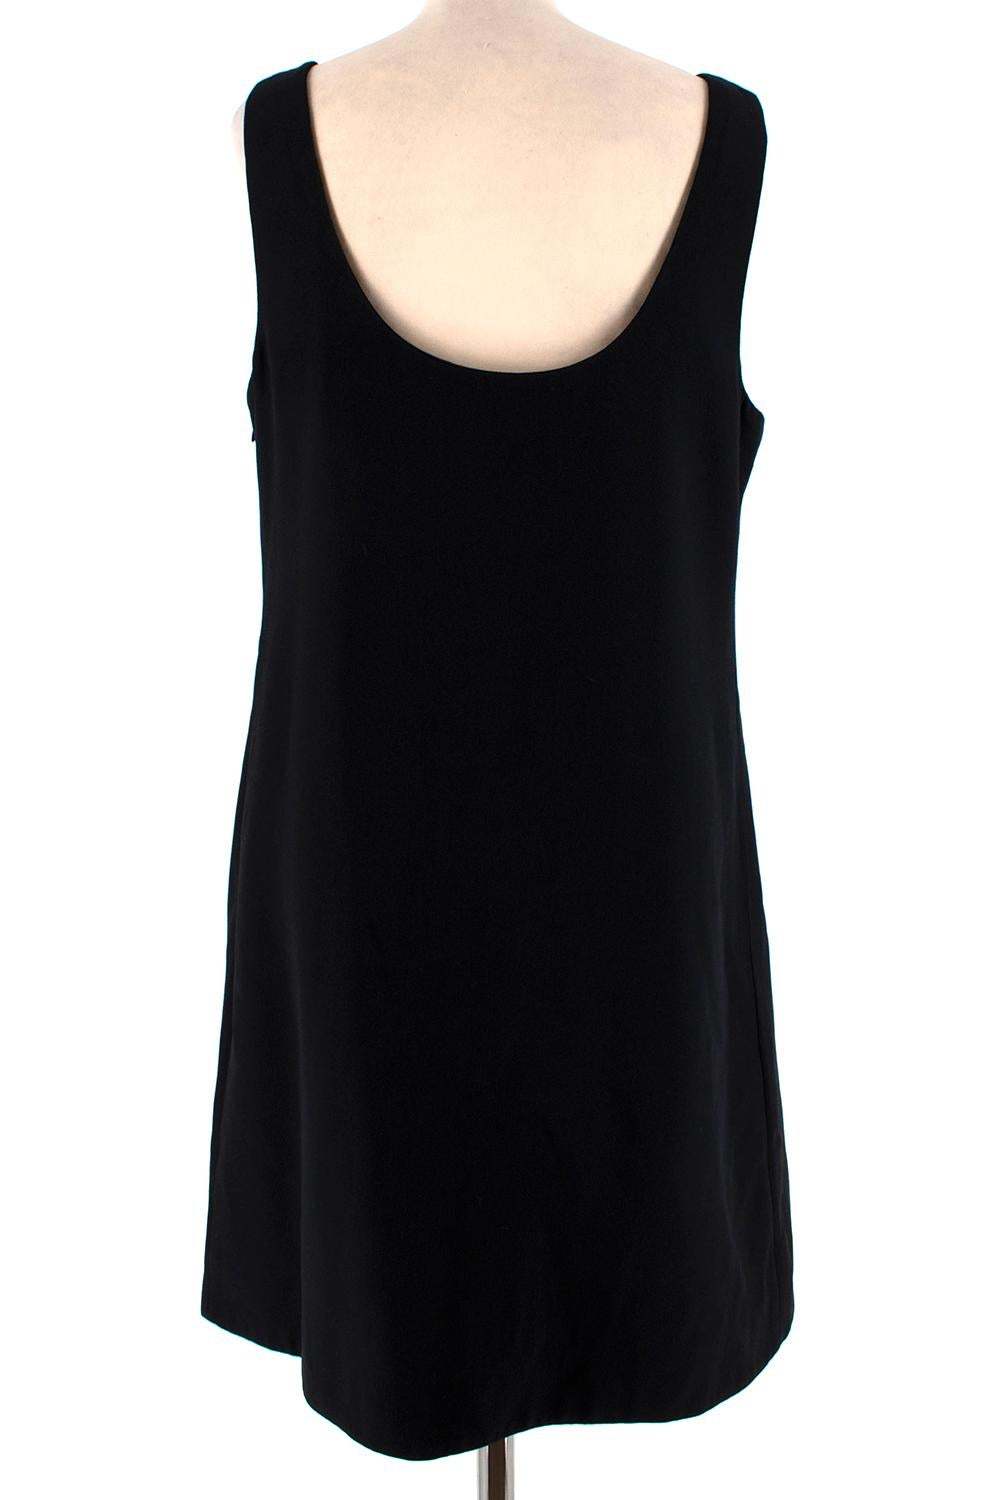 Prada Black Sleeveless Mini Dress with Bow - Size US 8 In Excellent Condition In London, GB